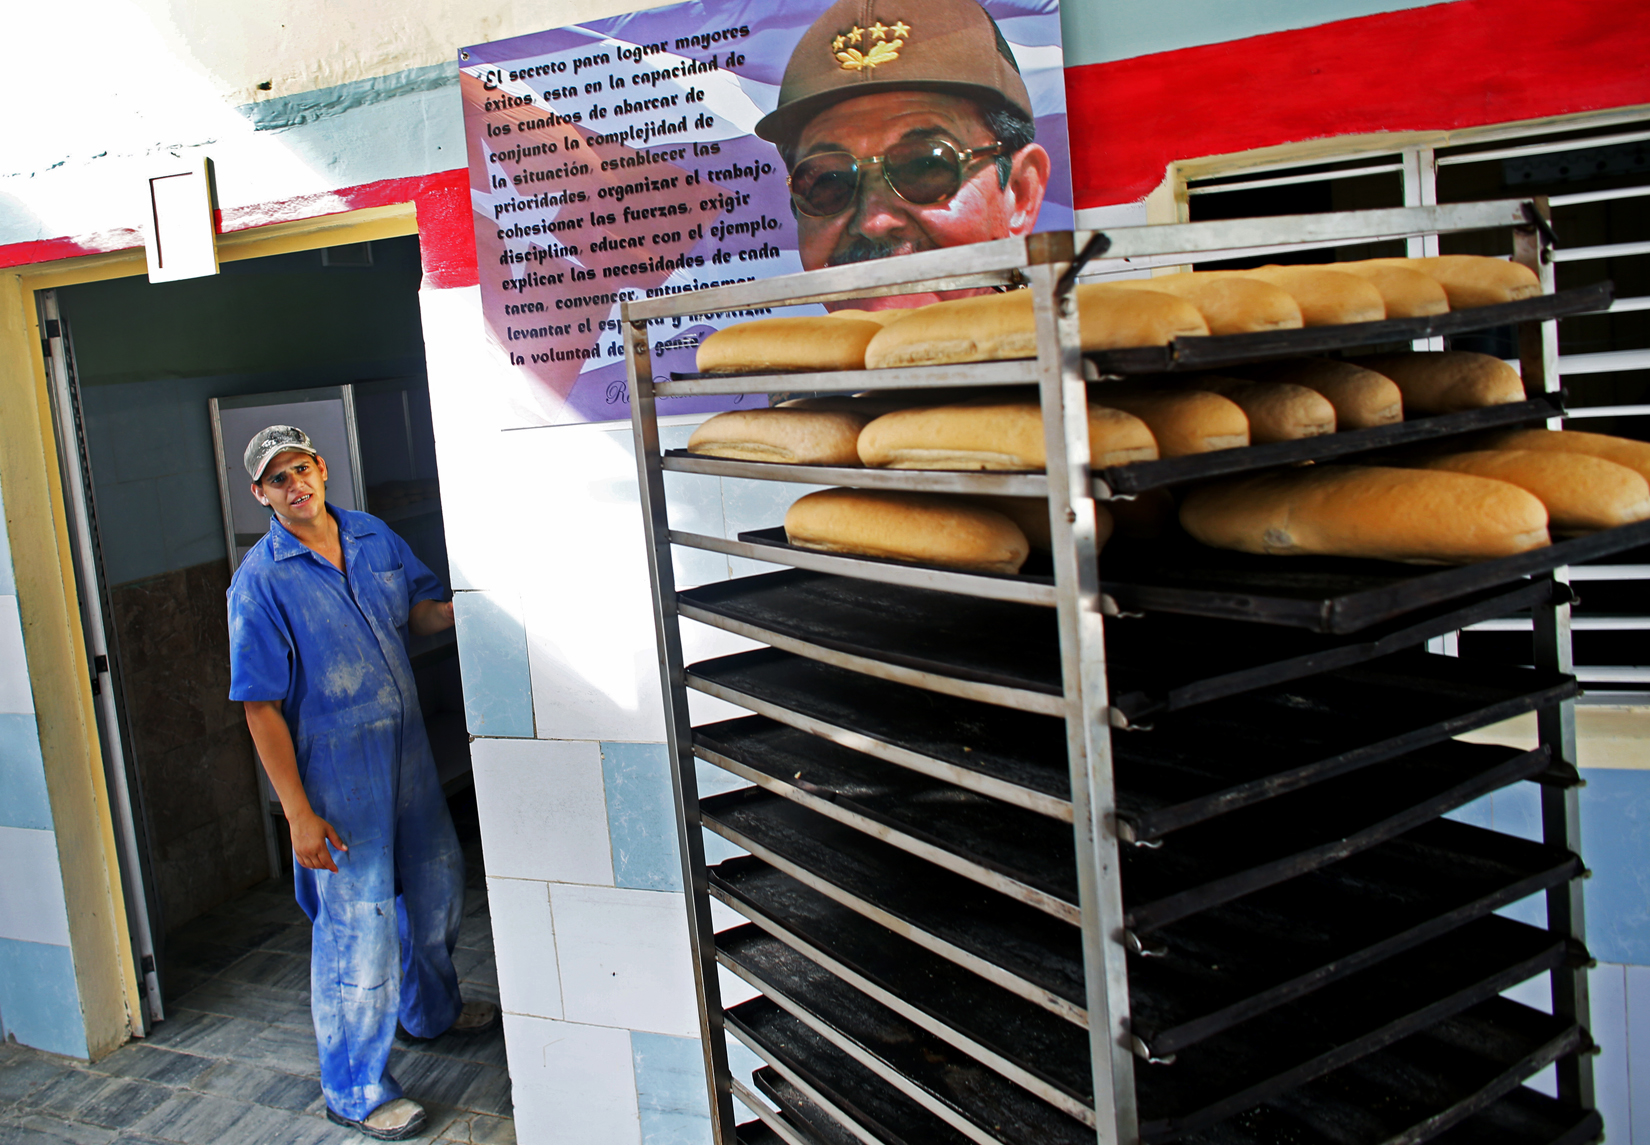 A bakery features a portrait of current president of Cuba Raúl Castro in the port city of Mariel, Cuba, a town whose tranquil appearance belies its important place in both the history and future of Cuban-American interaction. It is where Russians unloaded nuclear warheads in the 1962 Cuban missile crisis, and the gateway through which 125,000 Miami-bound emigres fled during the Mariel Boatlift of 1980. The town is now the site of construction of a deepwater container port and a free-trade zone, a critical ingredient for which will be the future of the U.S. embargo against Cuba, in place for more than 50 years but now under speculation of being lifted. 